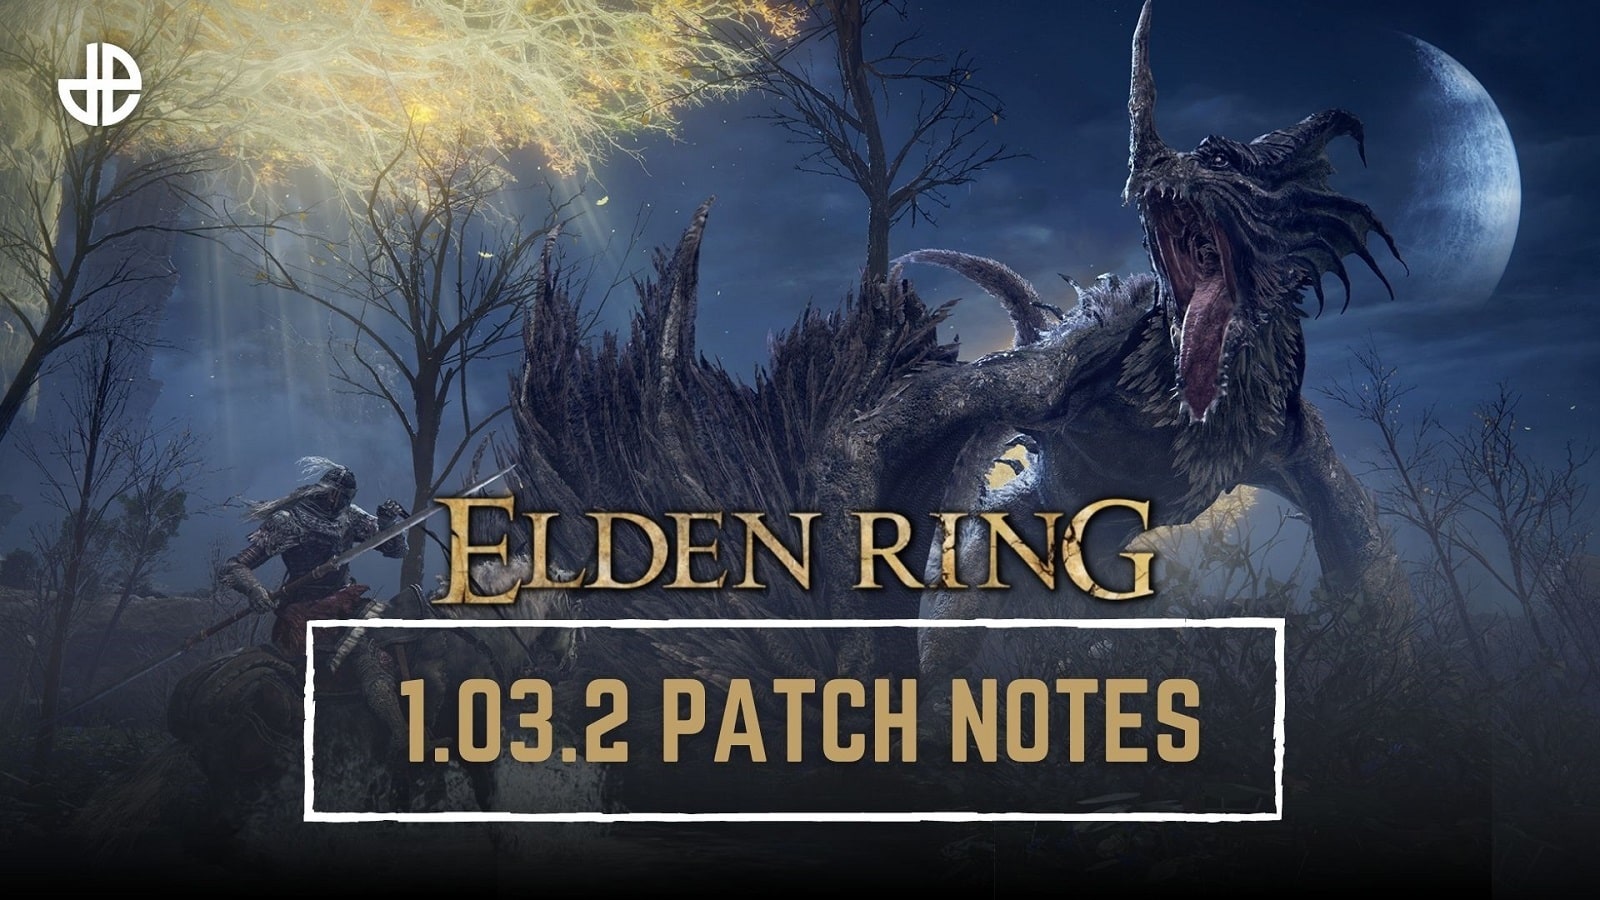 Elden Ring patch notes 1.03.2